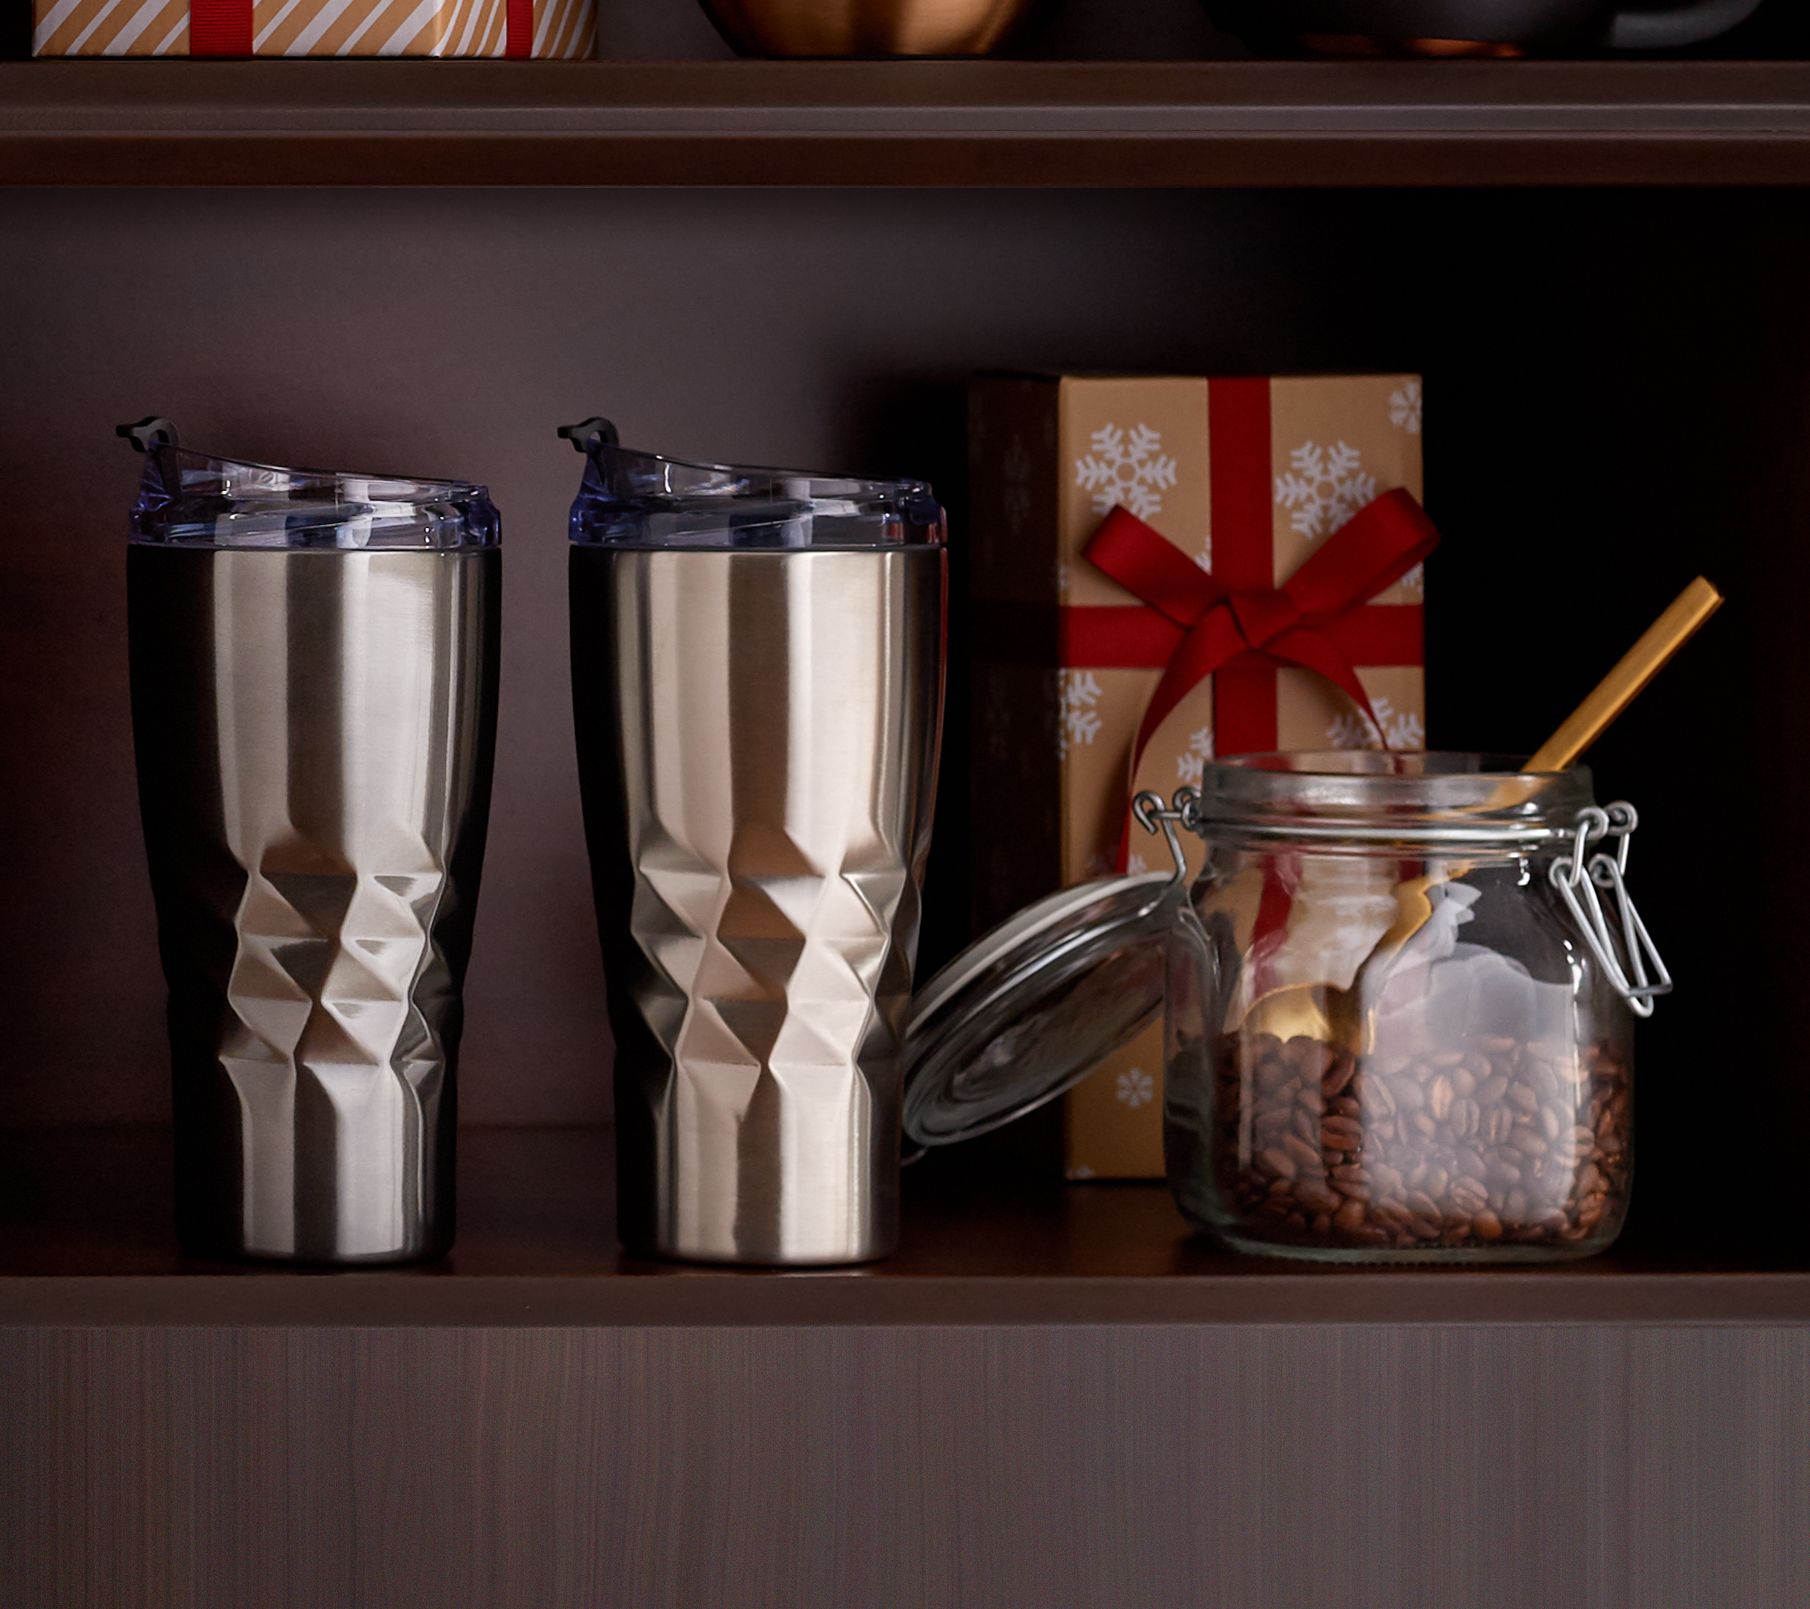 SideDeal: 4-Pack: Primula 20oz Insulated Tumblers